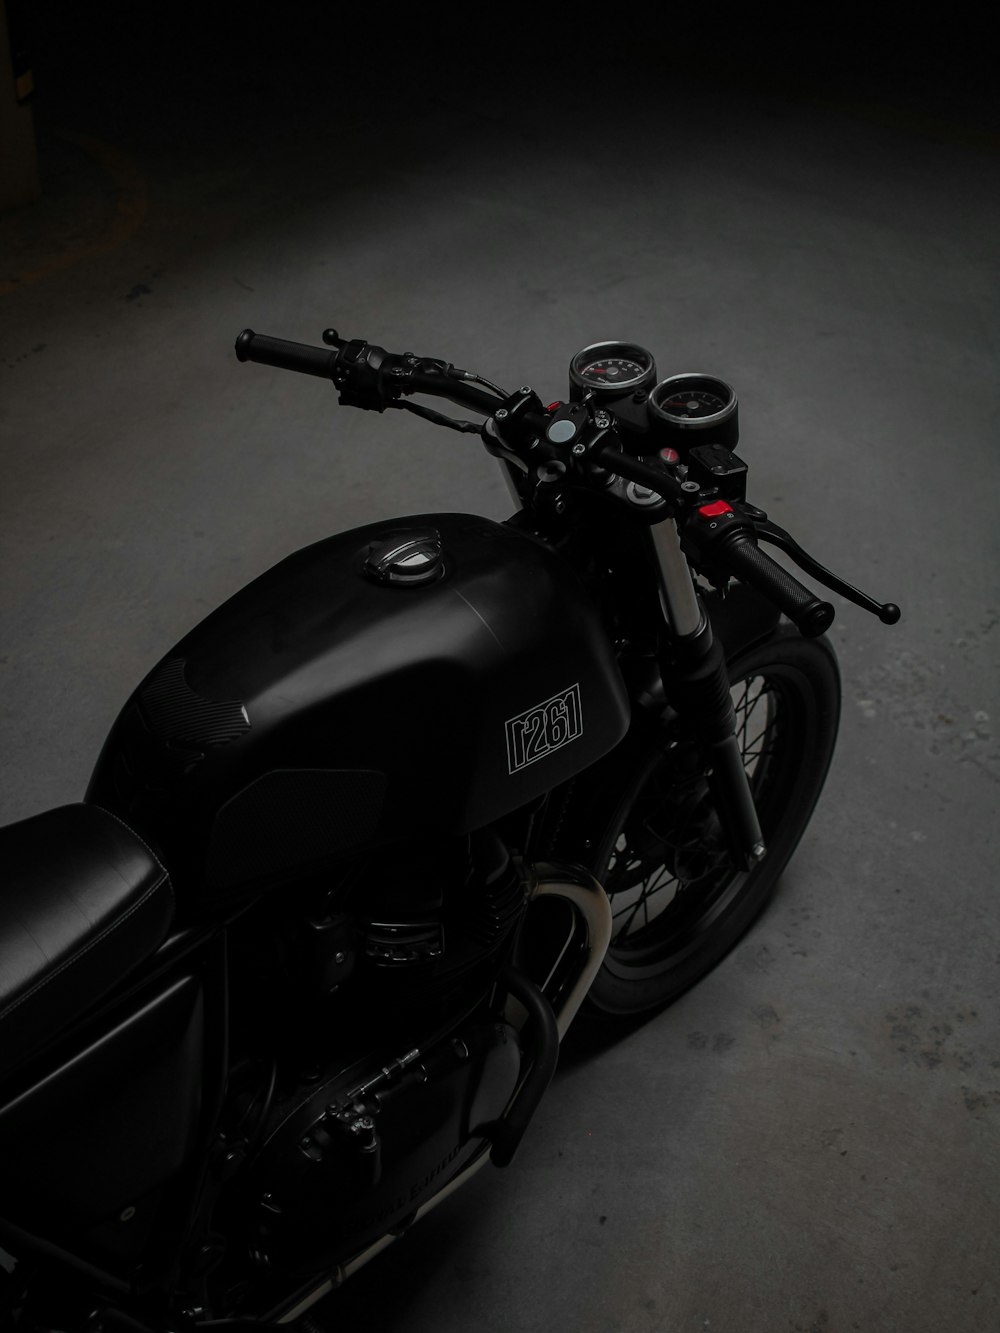 A black motorcycle parked in a dark room photo – Free Motorcycle Image on  Unsplash